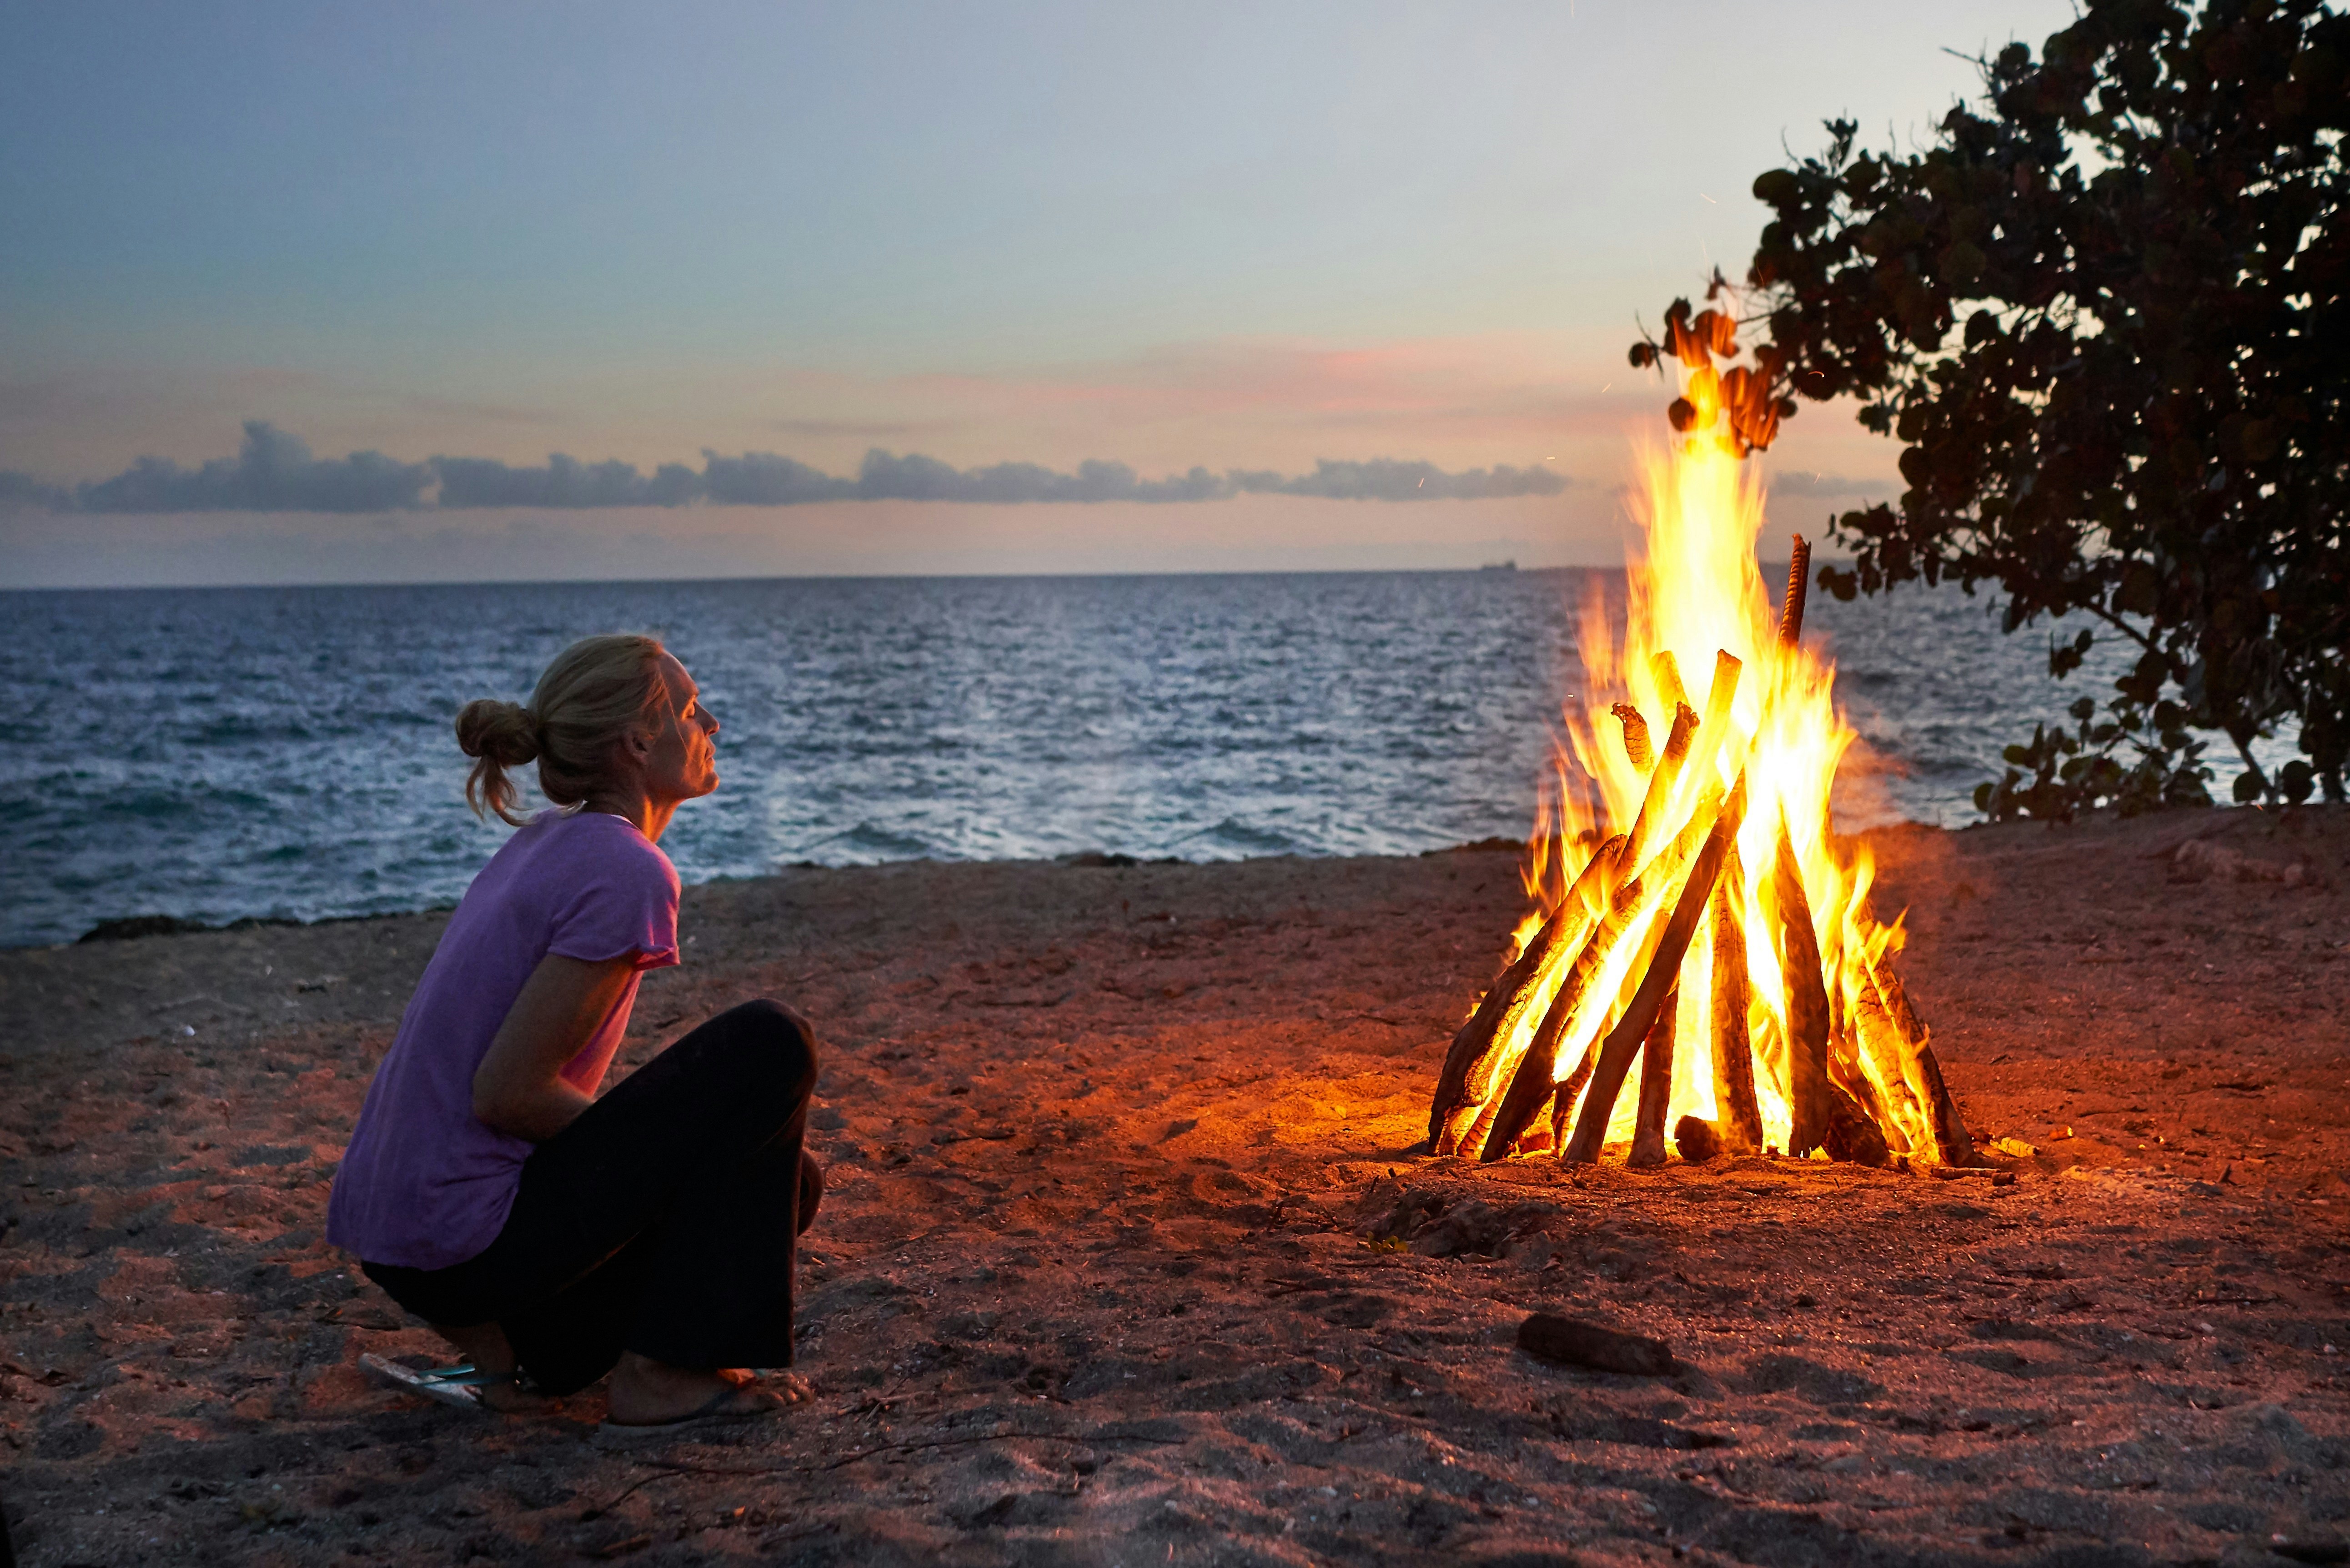 A woman sits by a campfire on the beach in the Dominican Republic at dusk